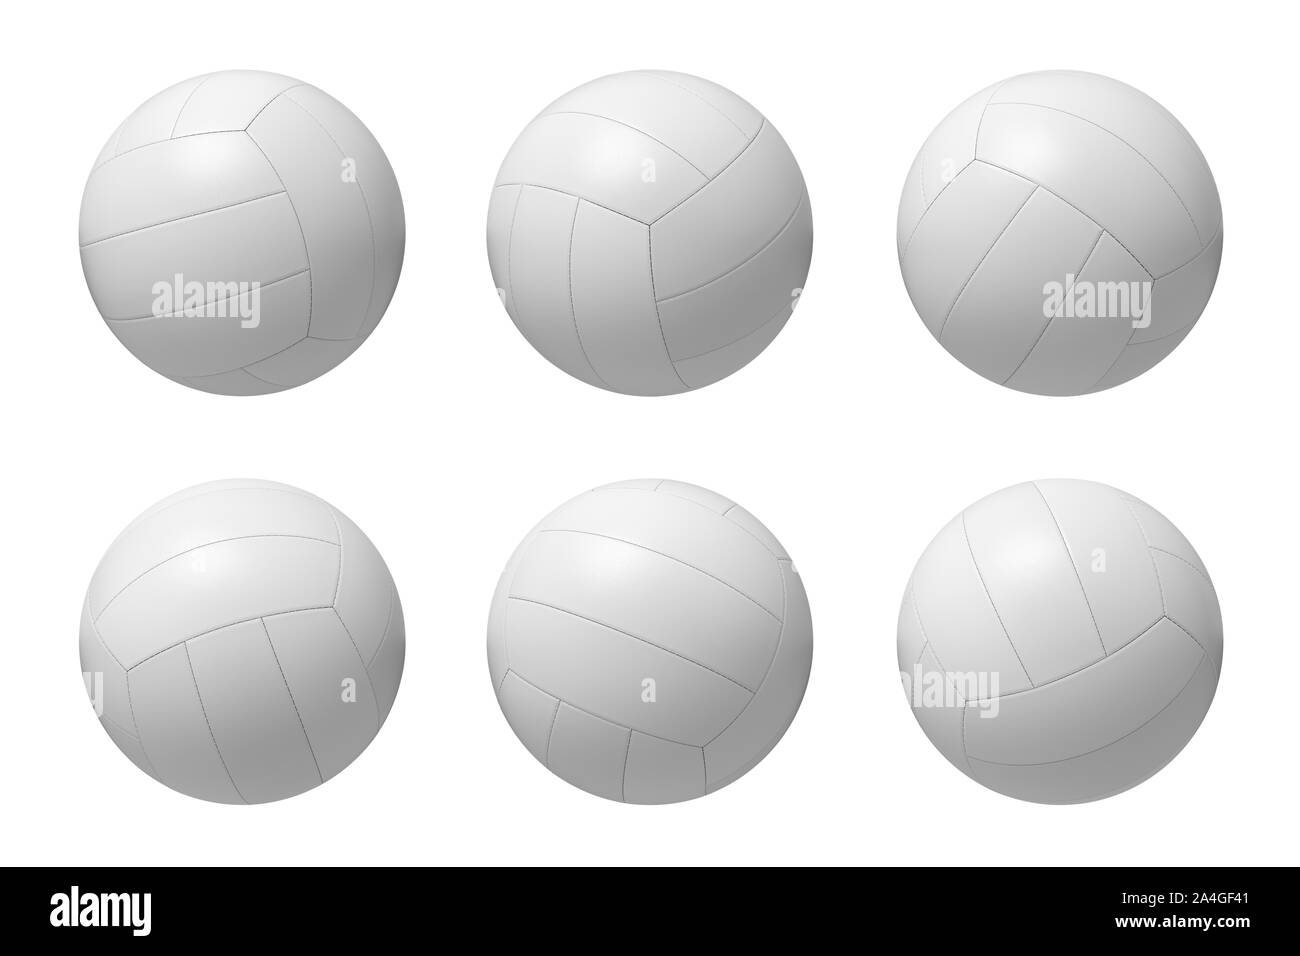 3d rendering of several white volleyball balls hanging on a white background. Stock Photo